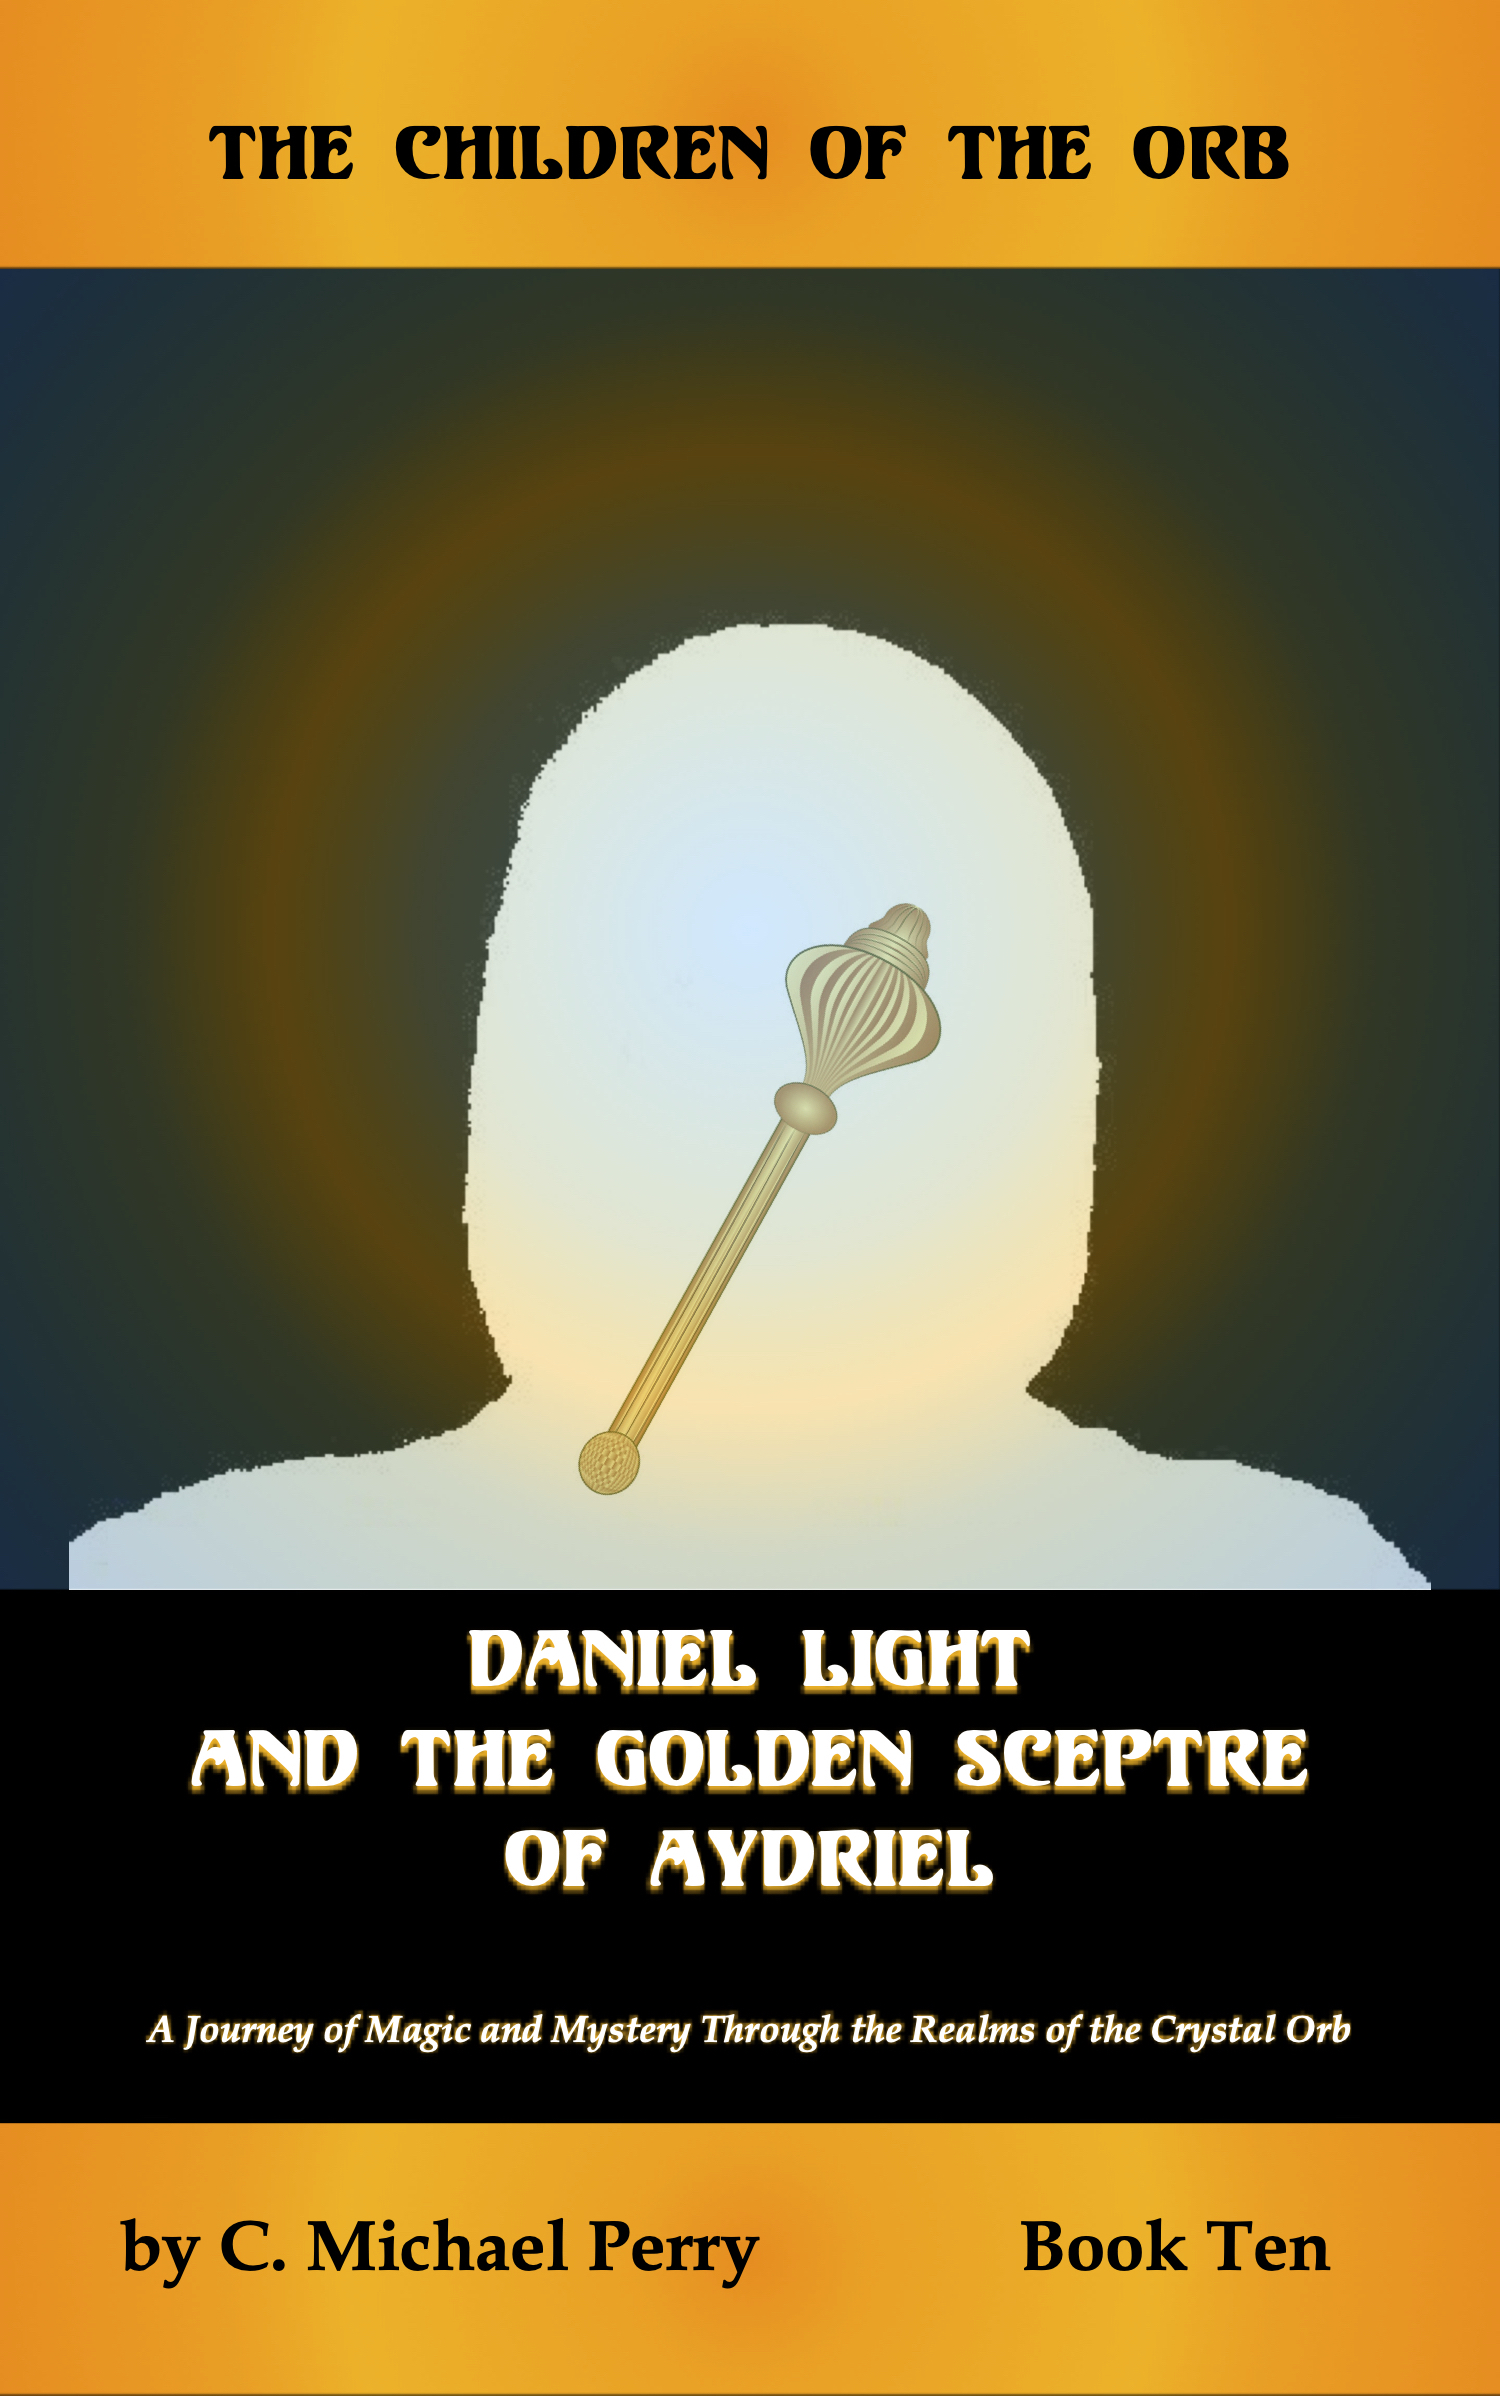 Daniel Light and the Golden Sceptre of Aydriel • Book 10